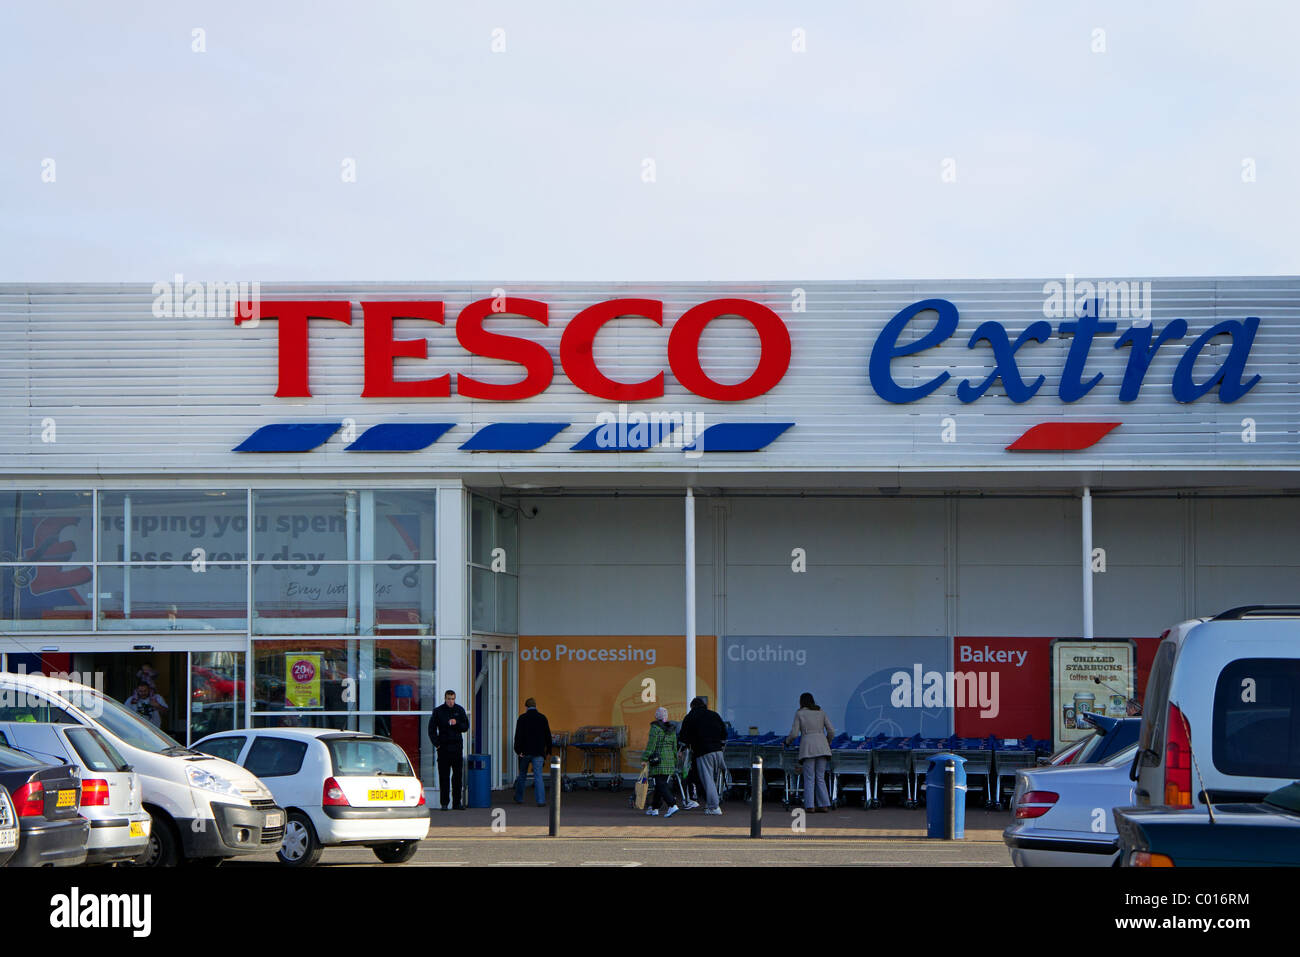 At tesco extra High Resolution Stock Photography and Images 